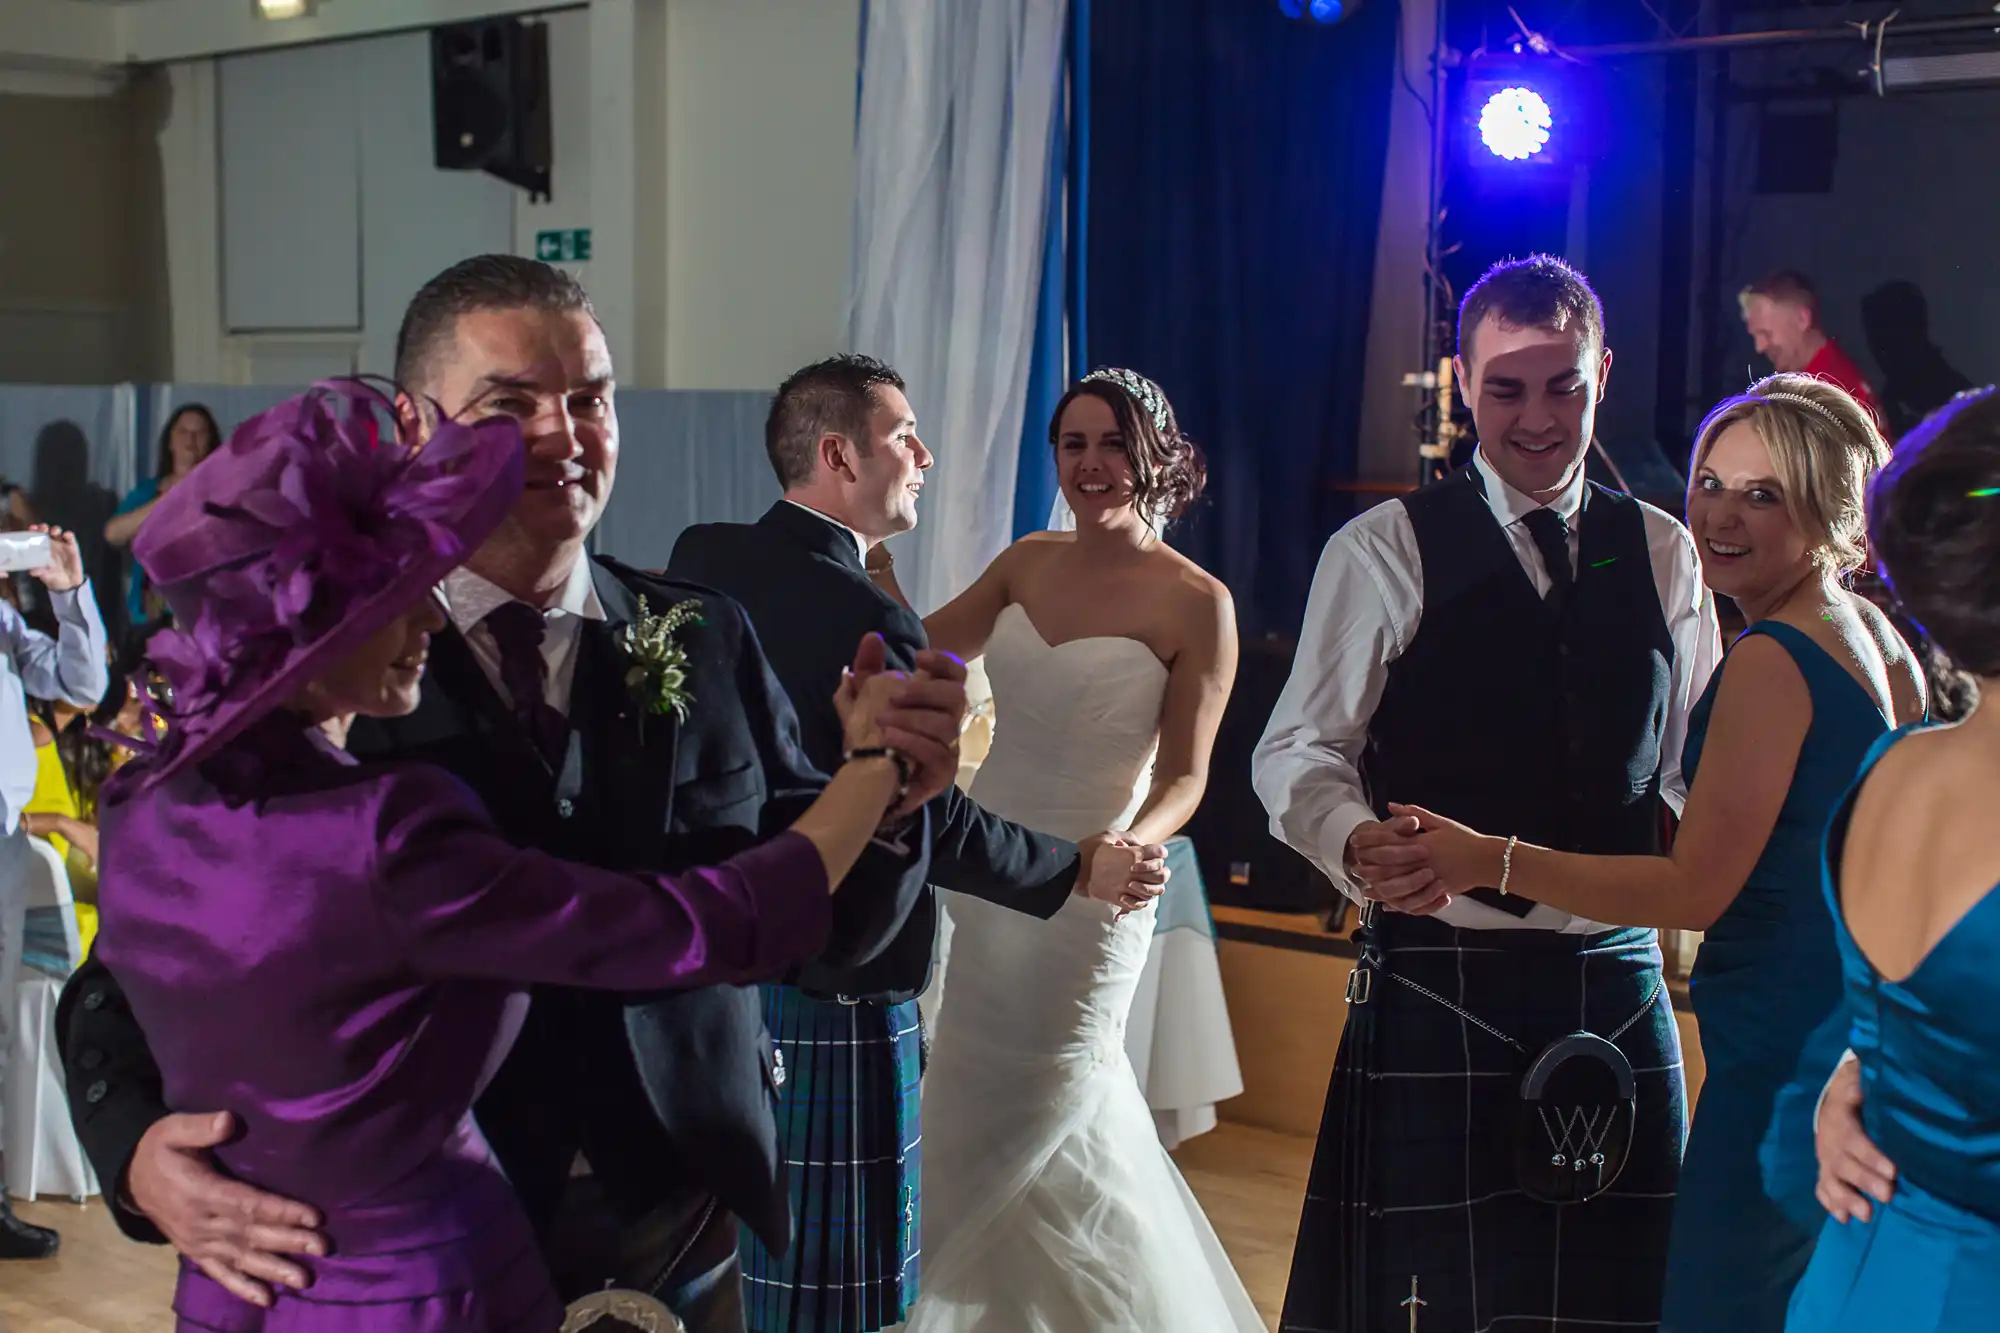 A joyful wedding reception with guests dancing; the bride and groom in the center, surrounded by guests in formal attire, including kilts.